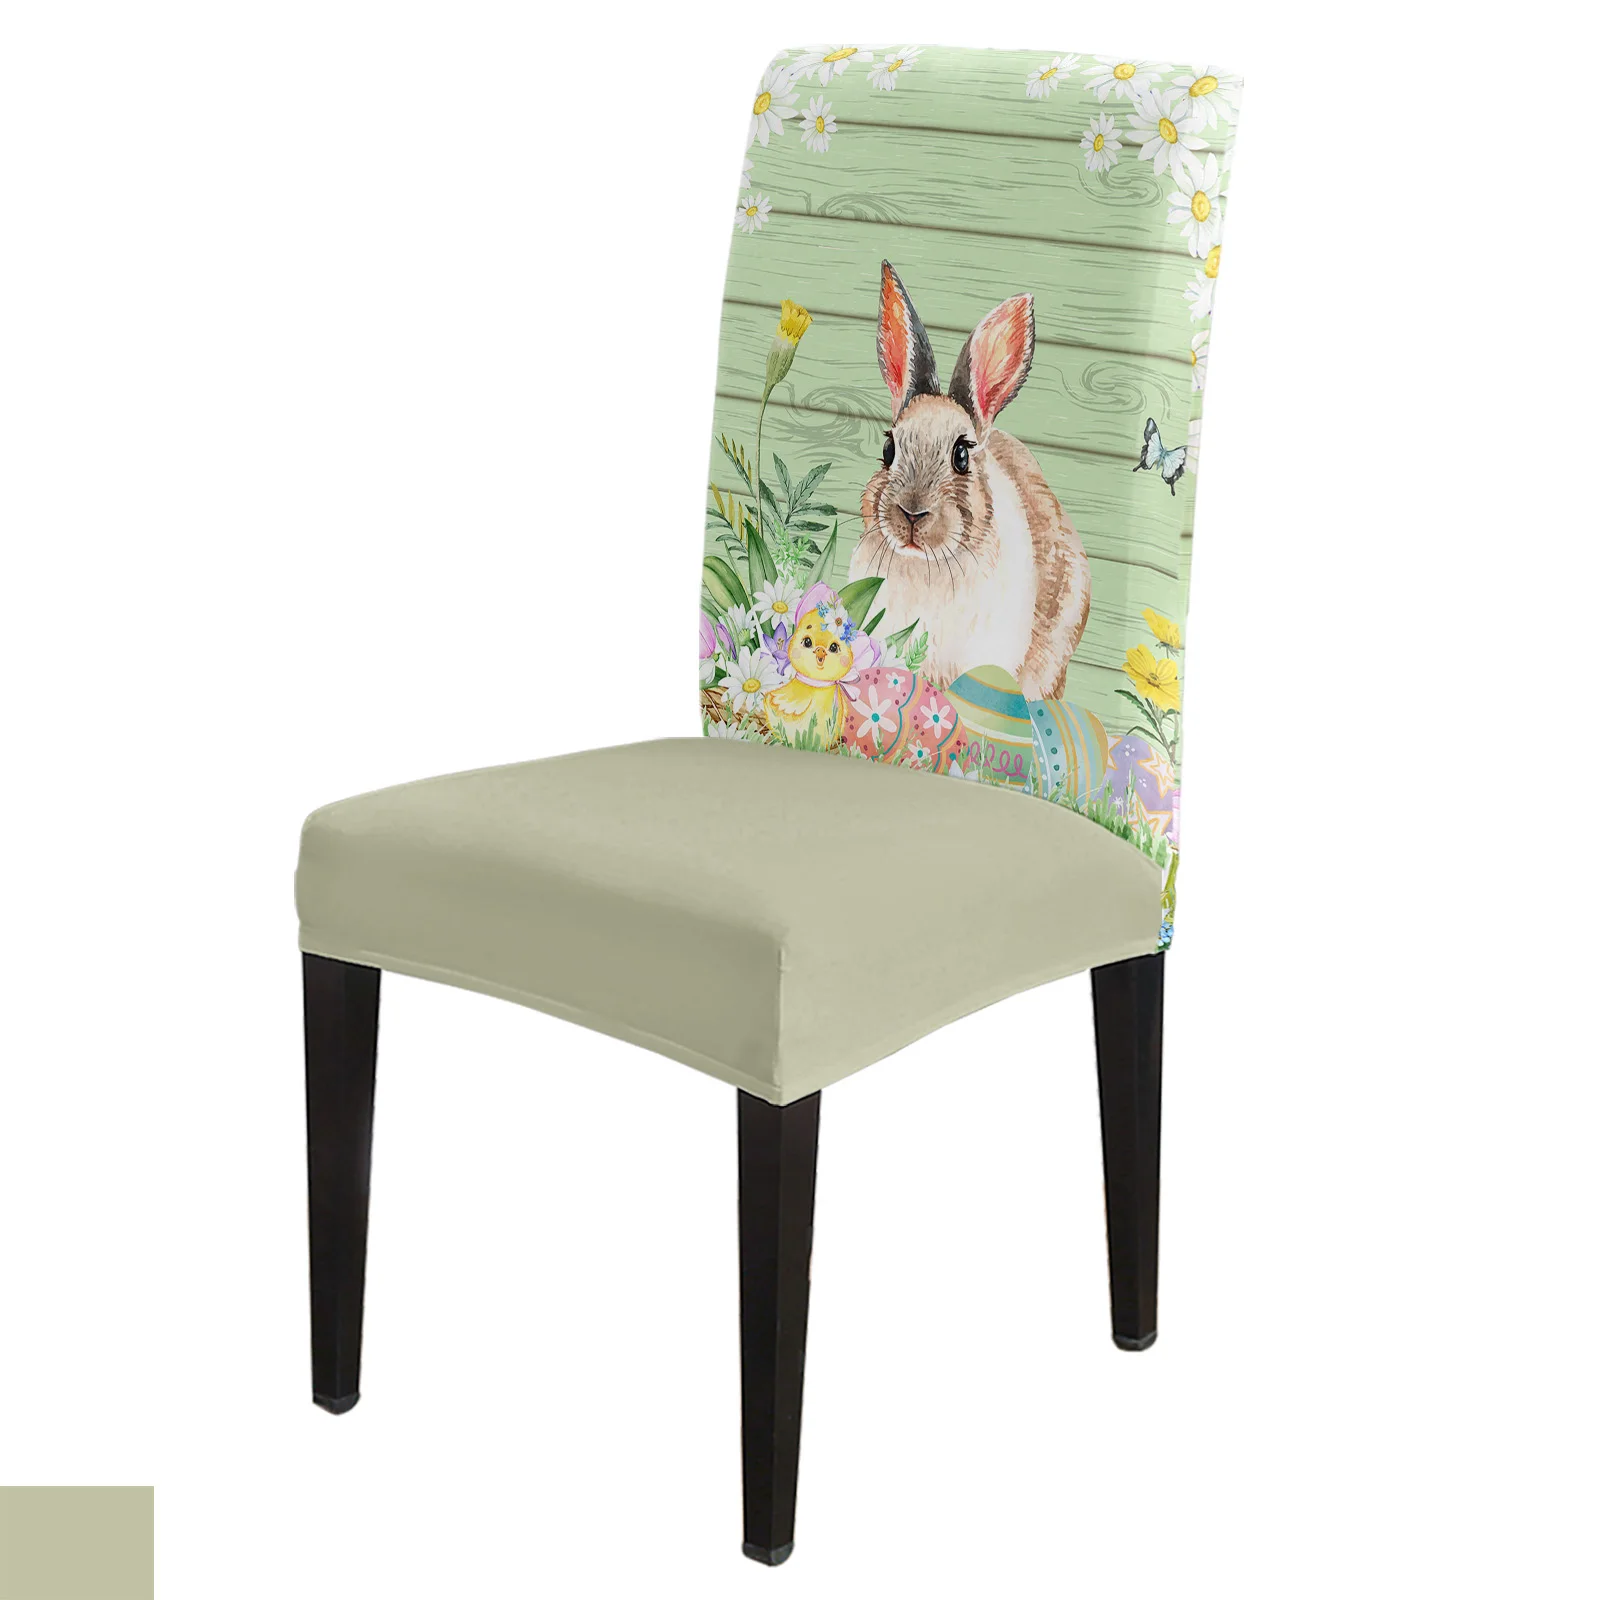 

Easter Bunny Eggs Flowers Wood Grain Chair Cover Dining Spandex Stretch Seat Covers Home Office Decor Desk Chair Case Set